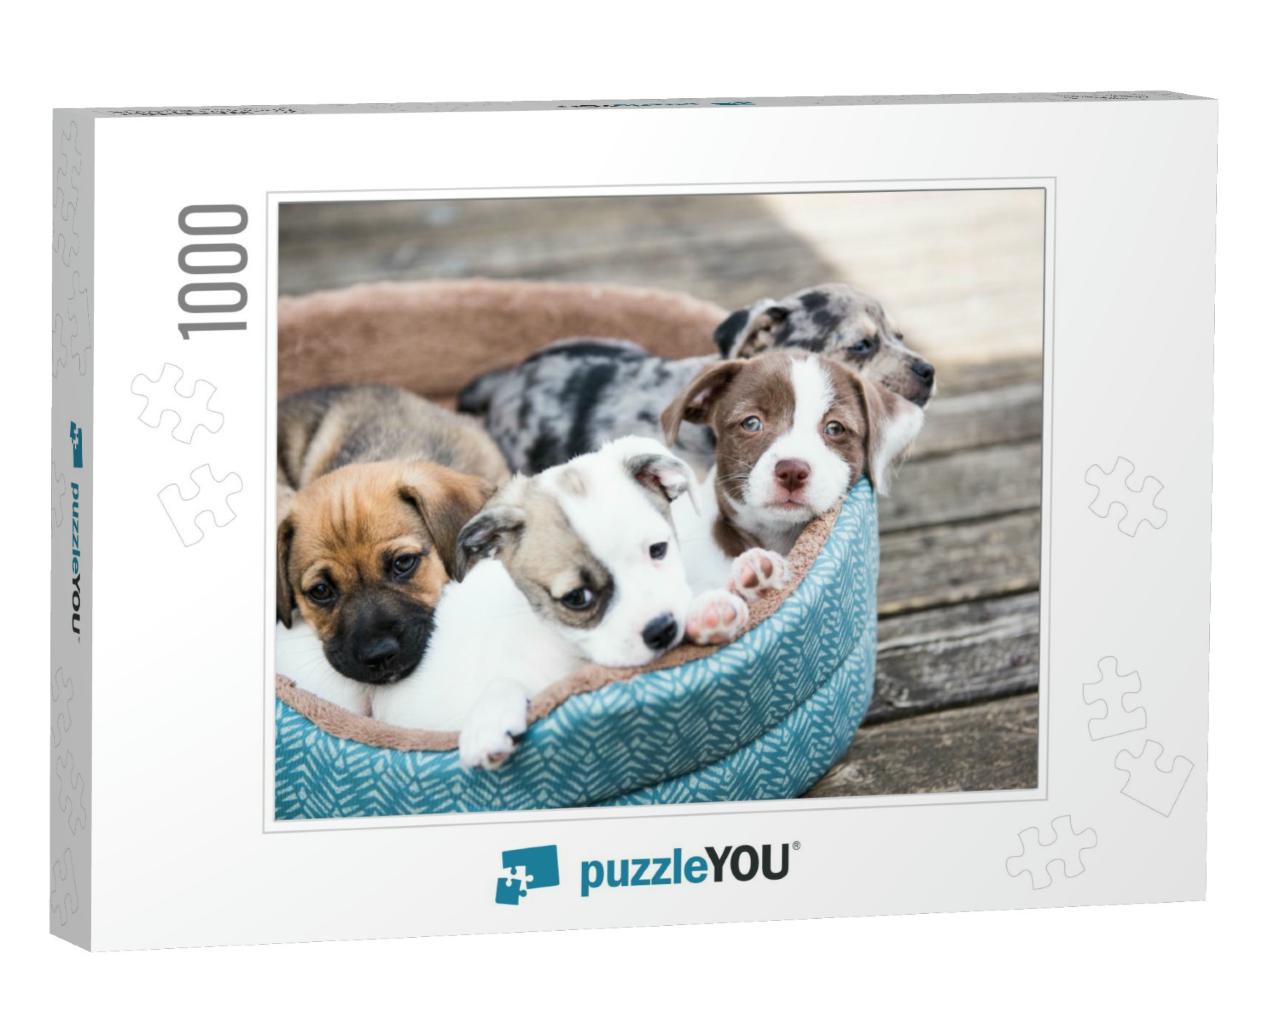 Litter of Terrier Mix Puppies Playing in Dog Bed Outside... Jigsaw Puzzle with 1000 pieces